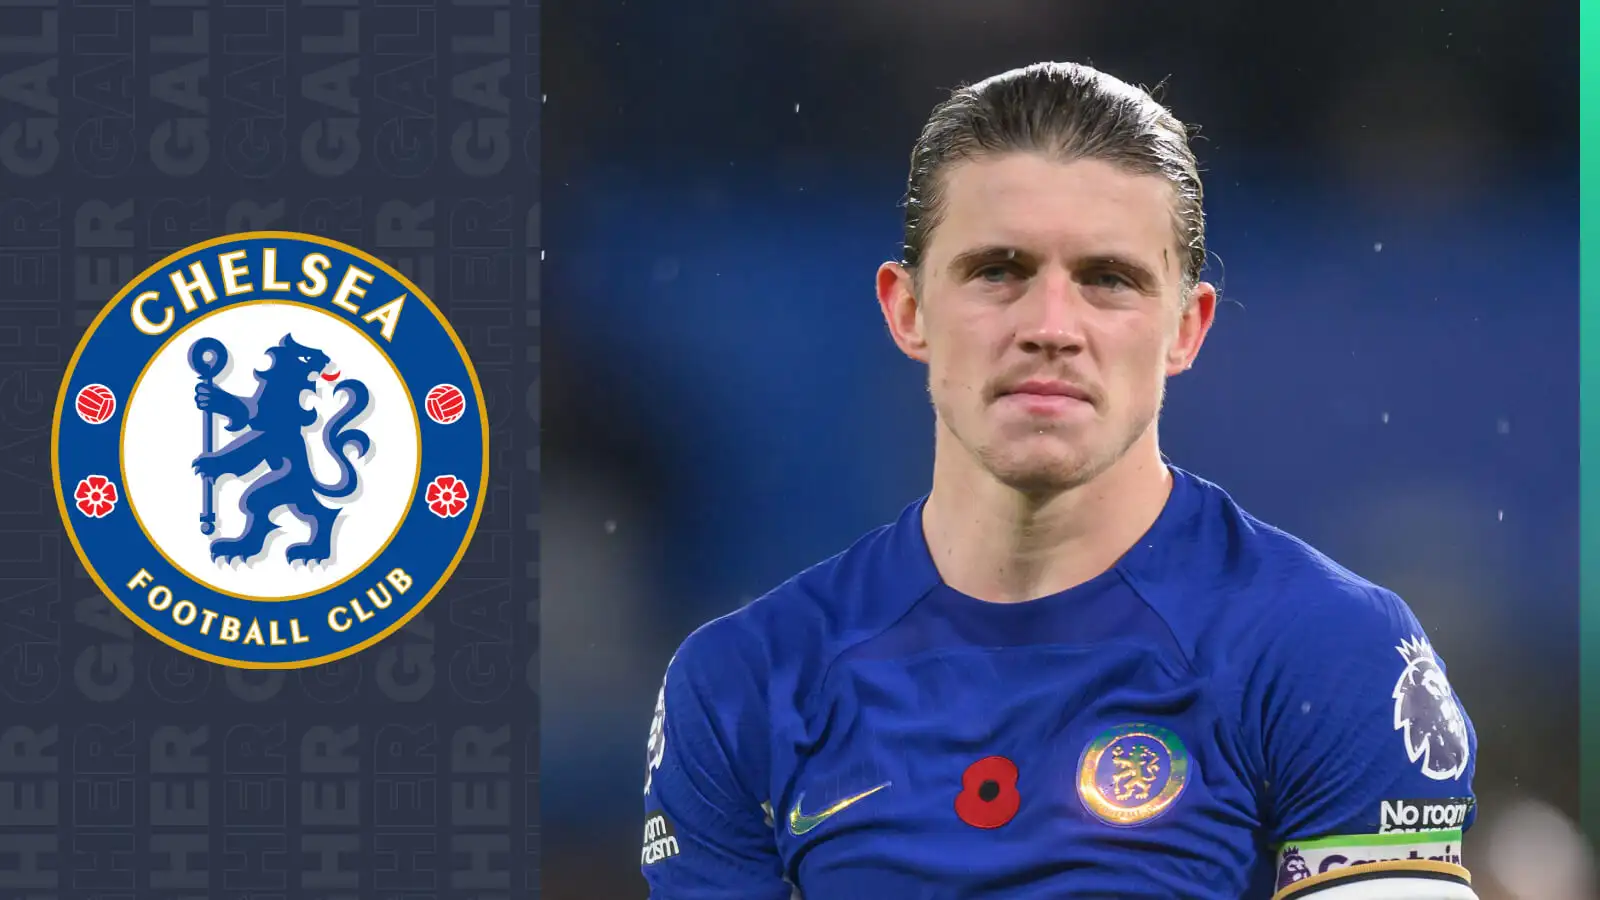 Chelsea keen to open talks with Conor Gallagher